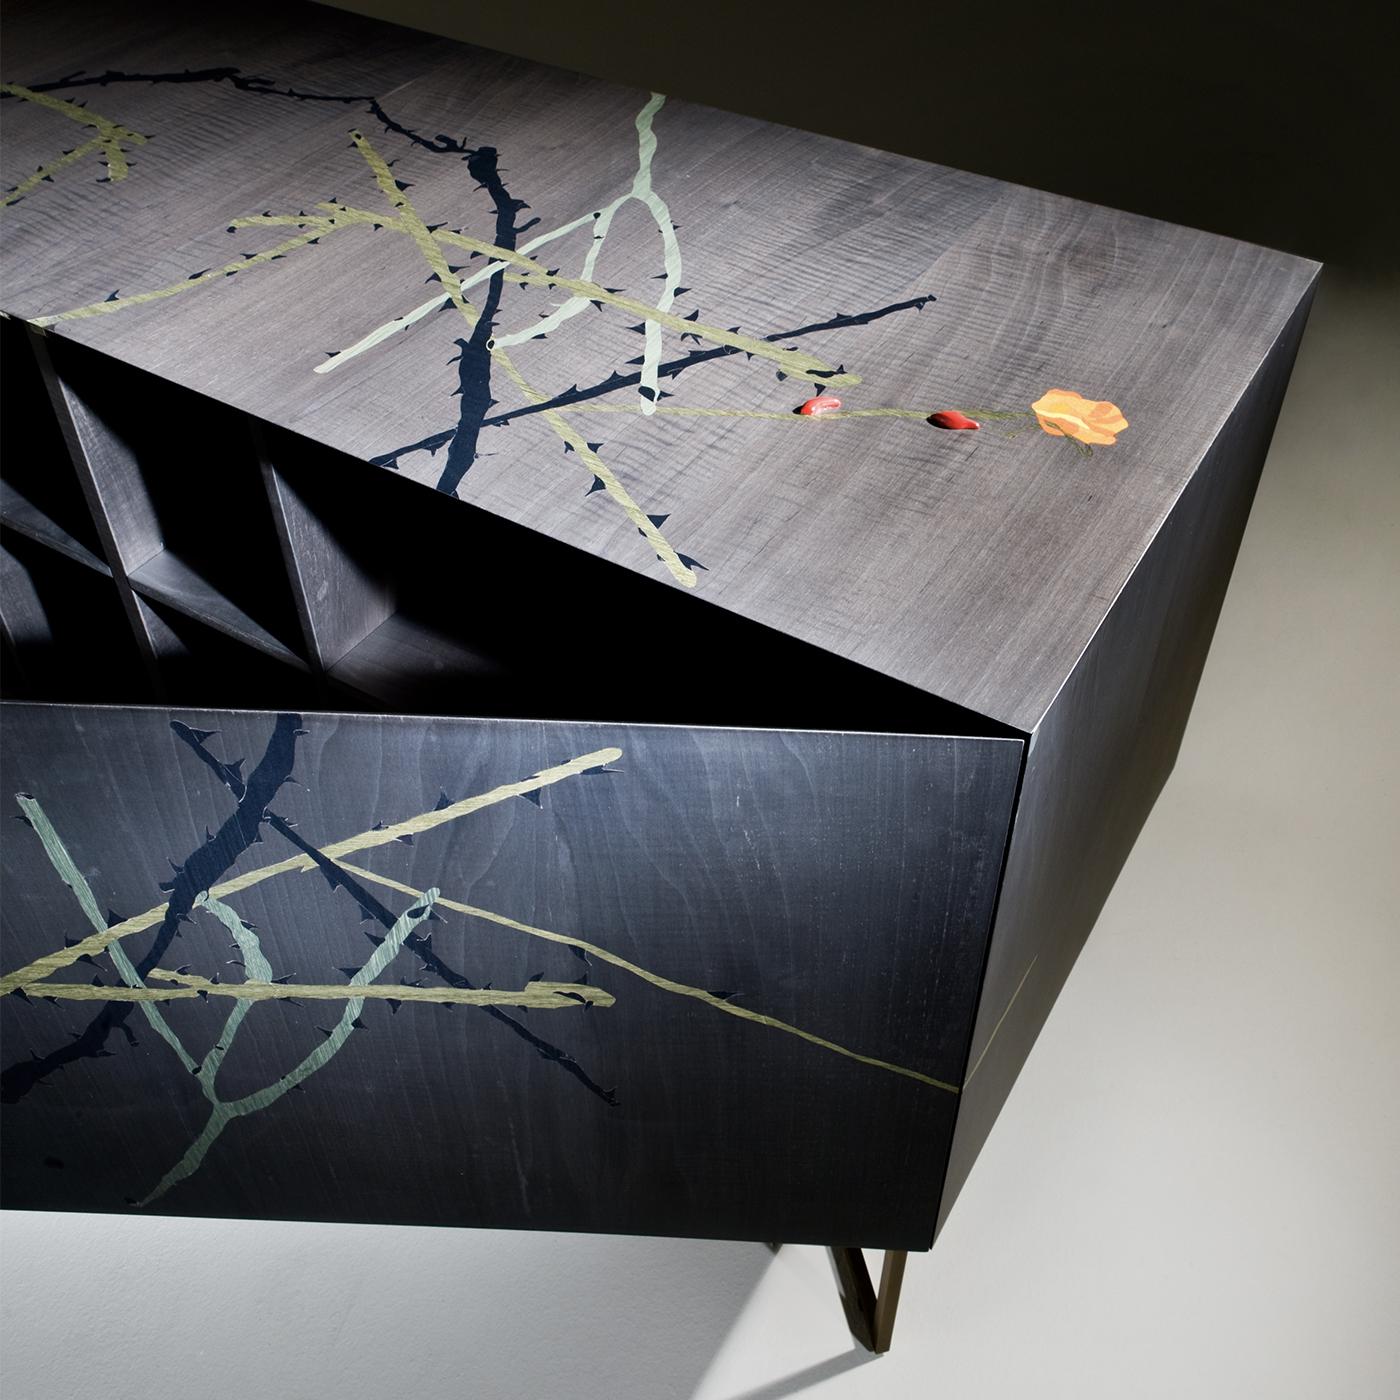 Two linear geometric legs crafted in brass support this long rectangular wooden sideboard. This work of functional art is one of only 21 specimens in this limited series. An abstract, multicolored pattern adorns this piece on all sides, top